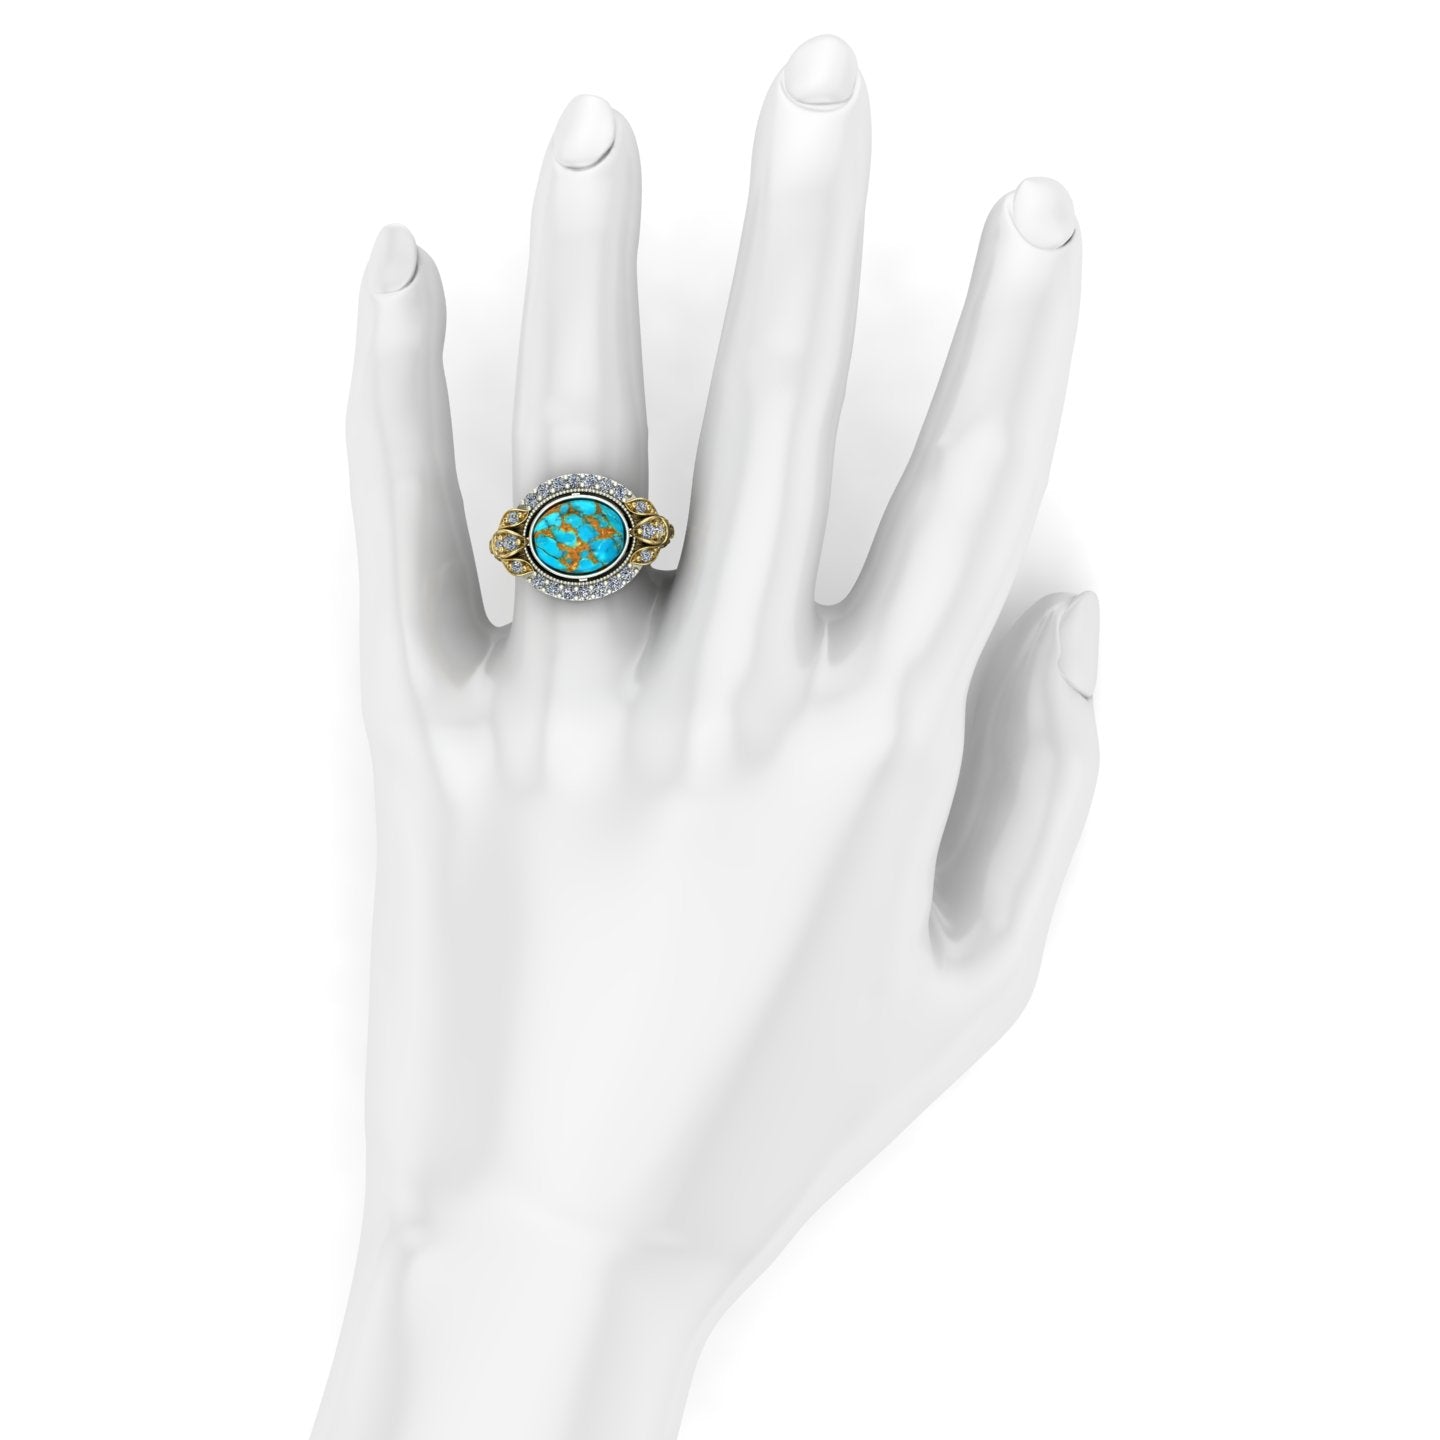 bezel set oval turquoise two tone ring in 14k yellow and white gold - Charles Babb Designs - on hand